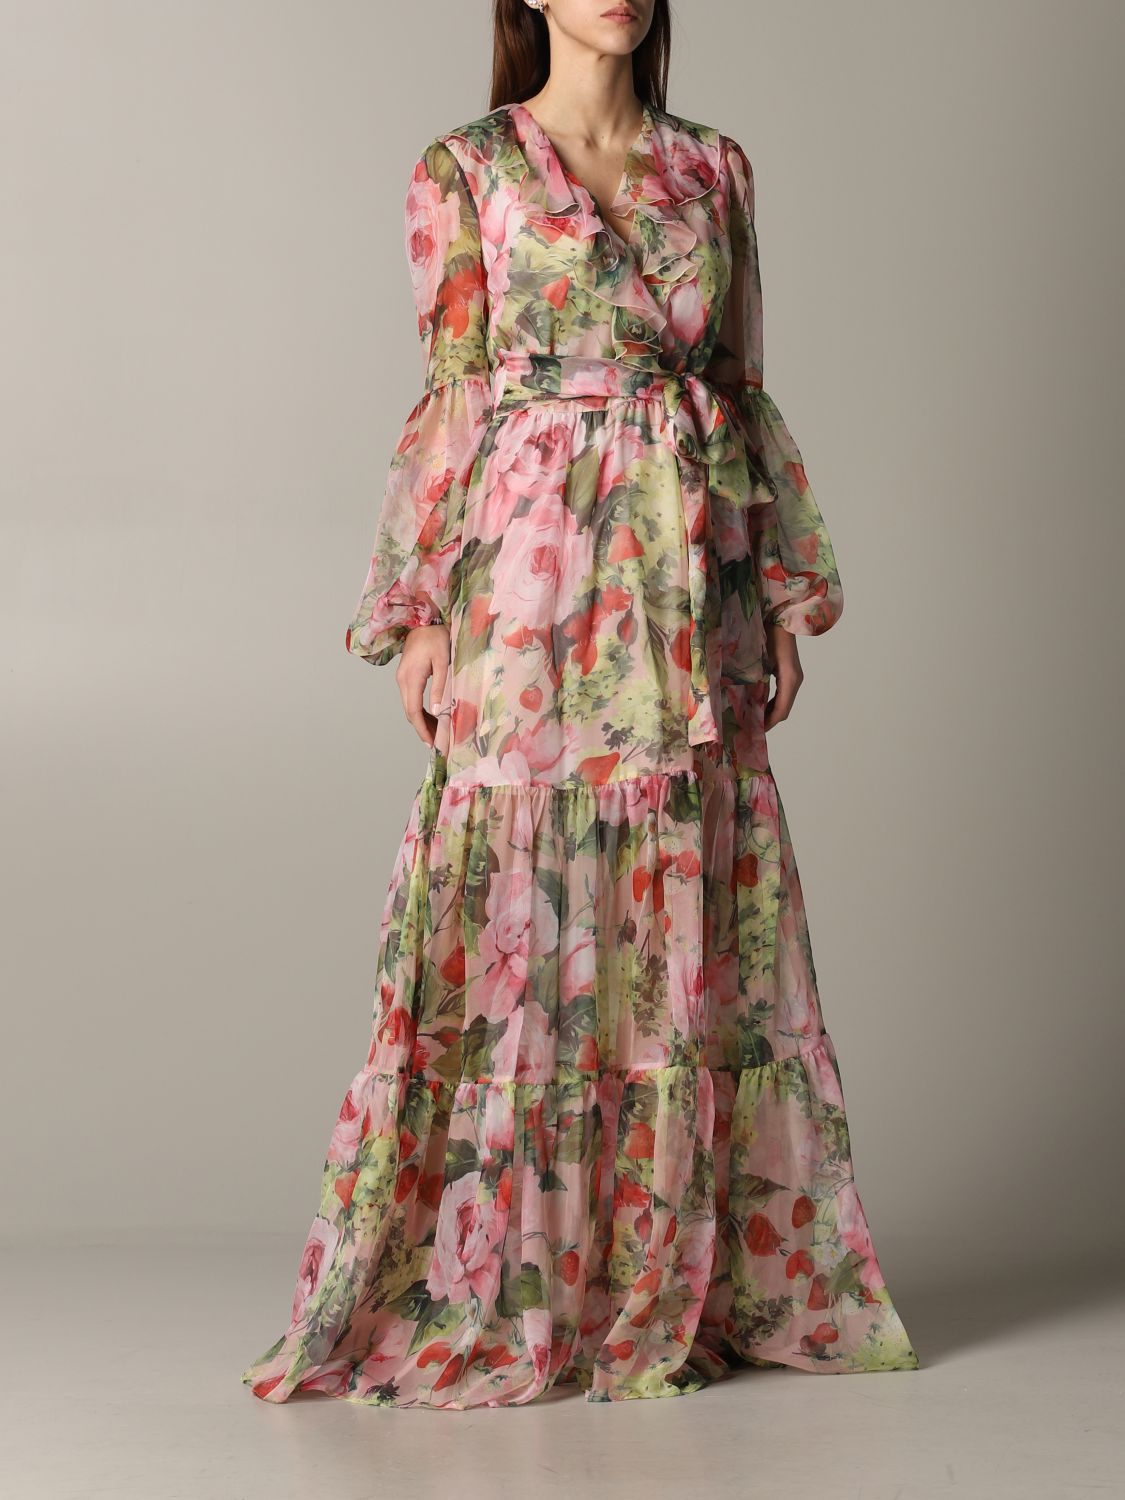 Blumarine Outlet: Long dress in floral patterned chiffon - Blush Pink ...